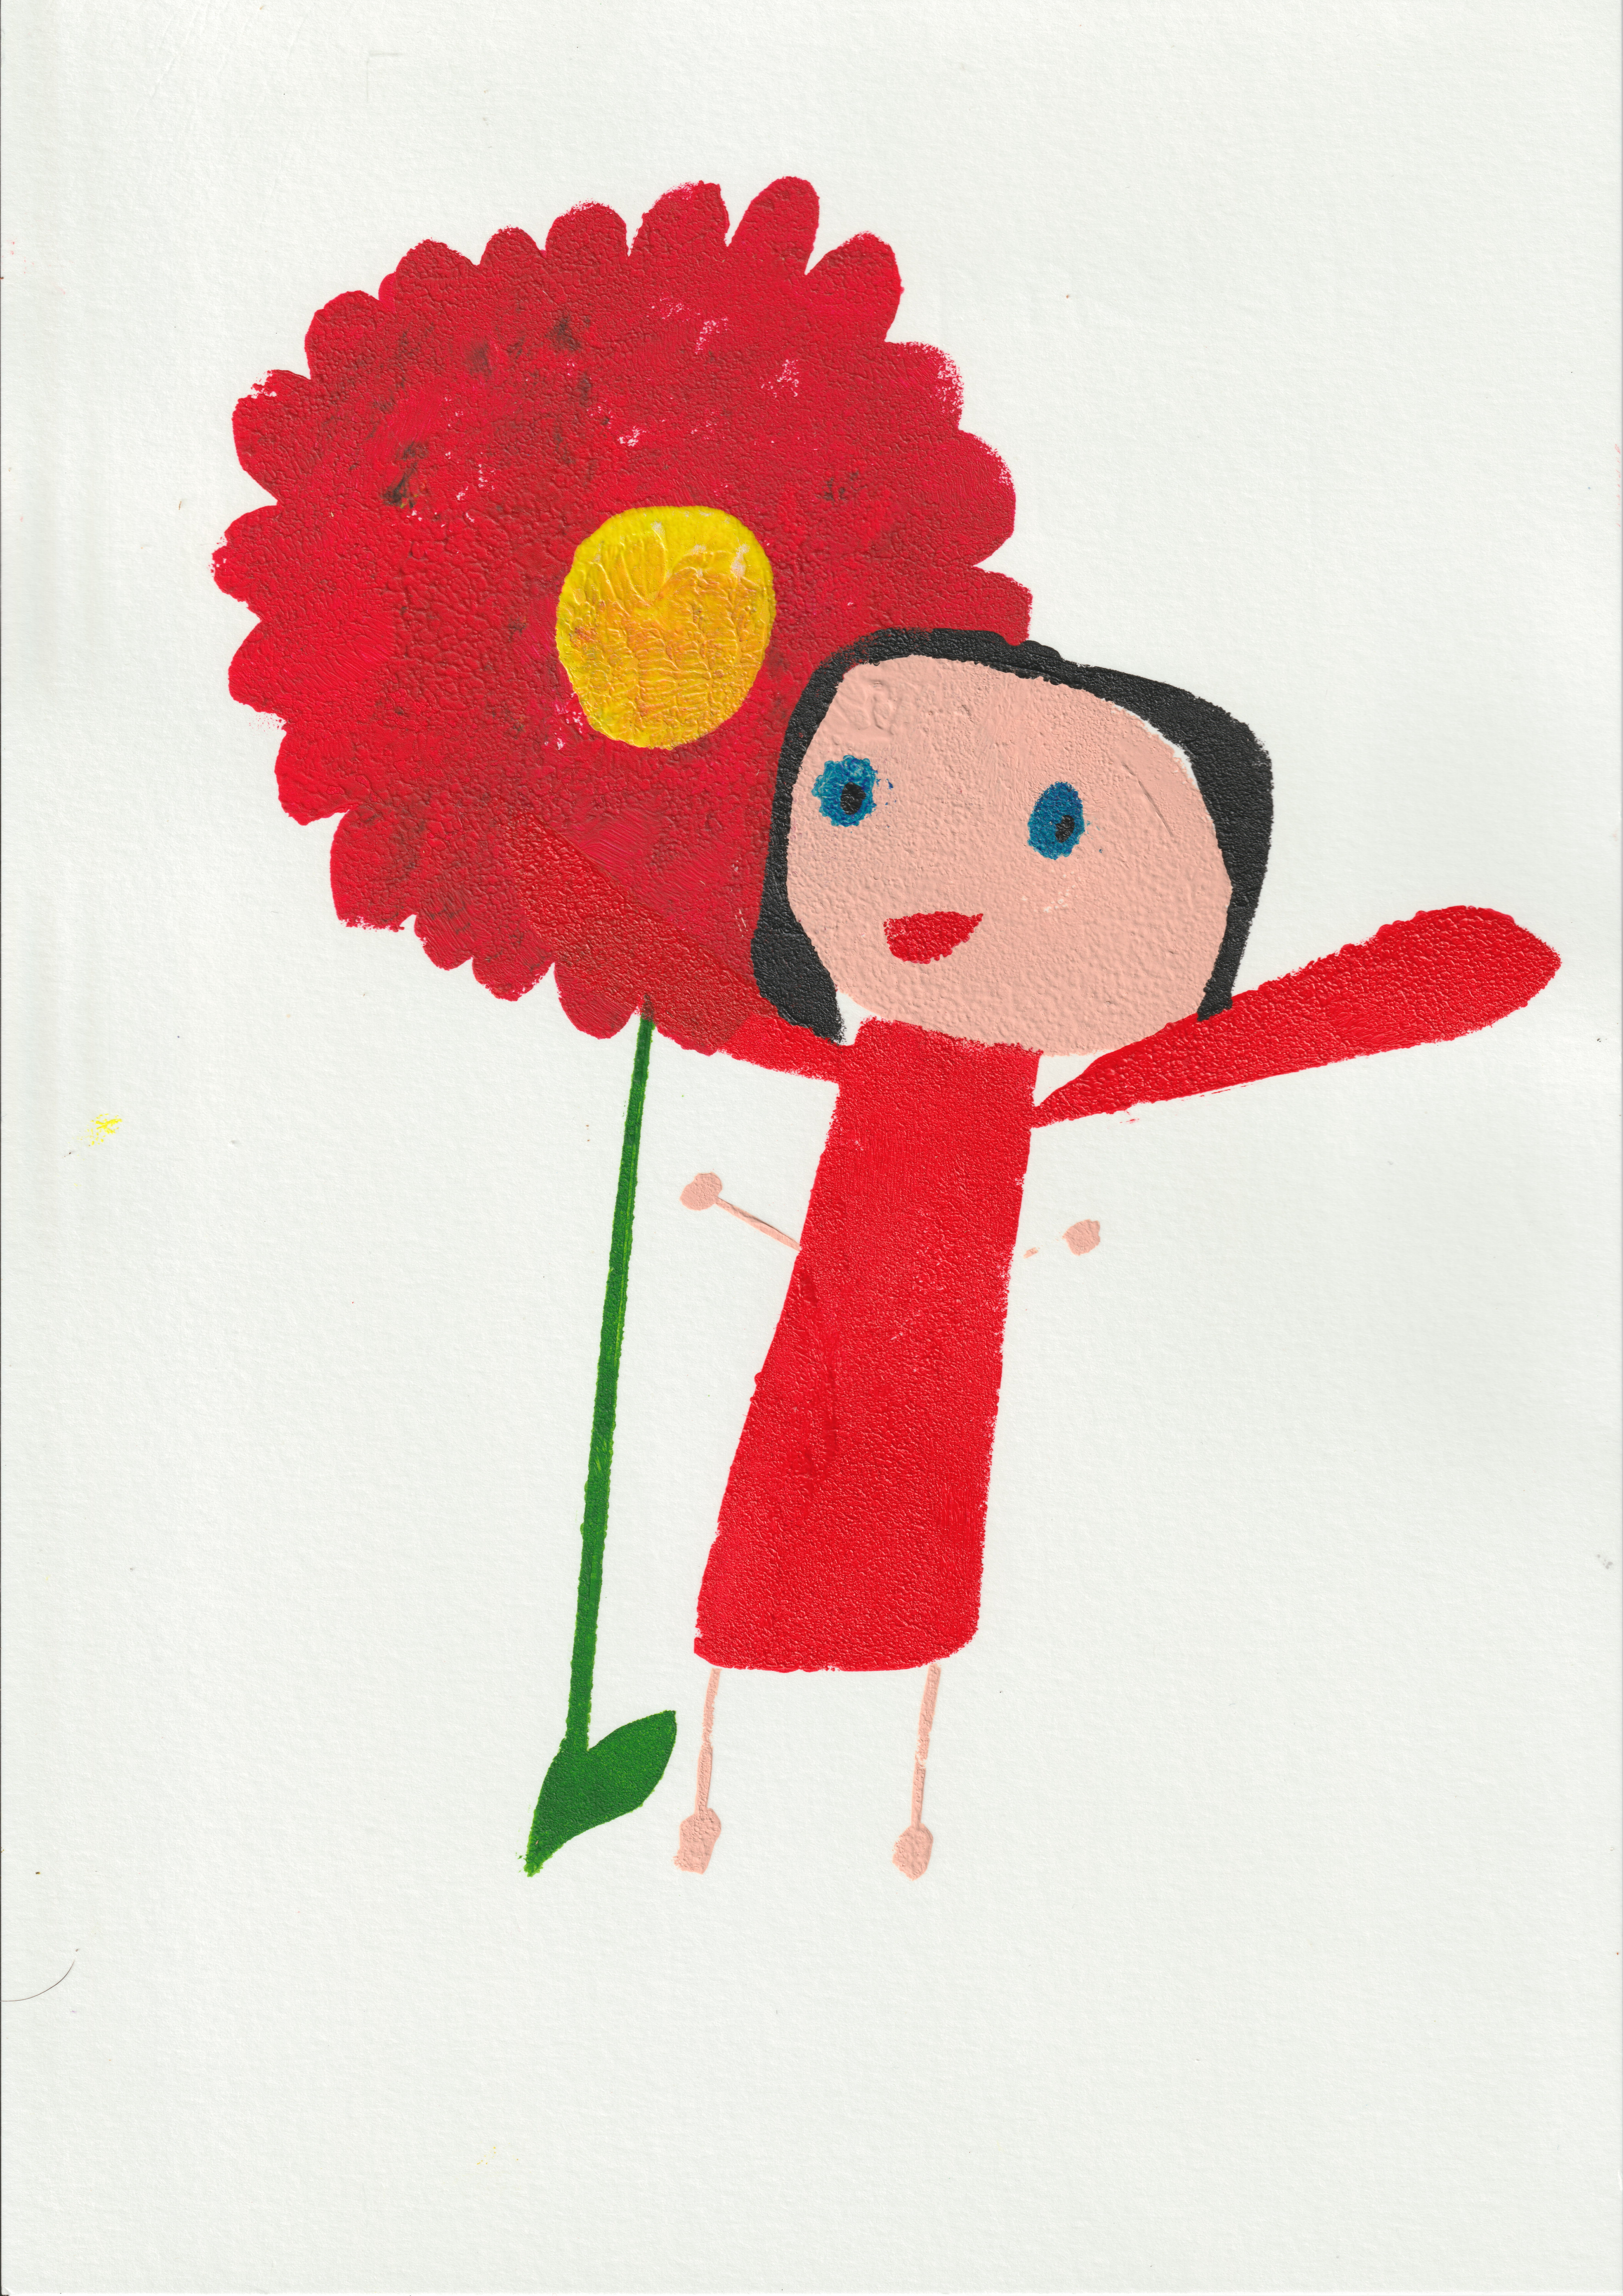 A print of a fairy in a red dress standing by a red flower.